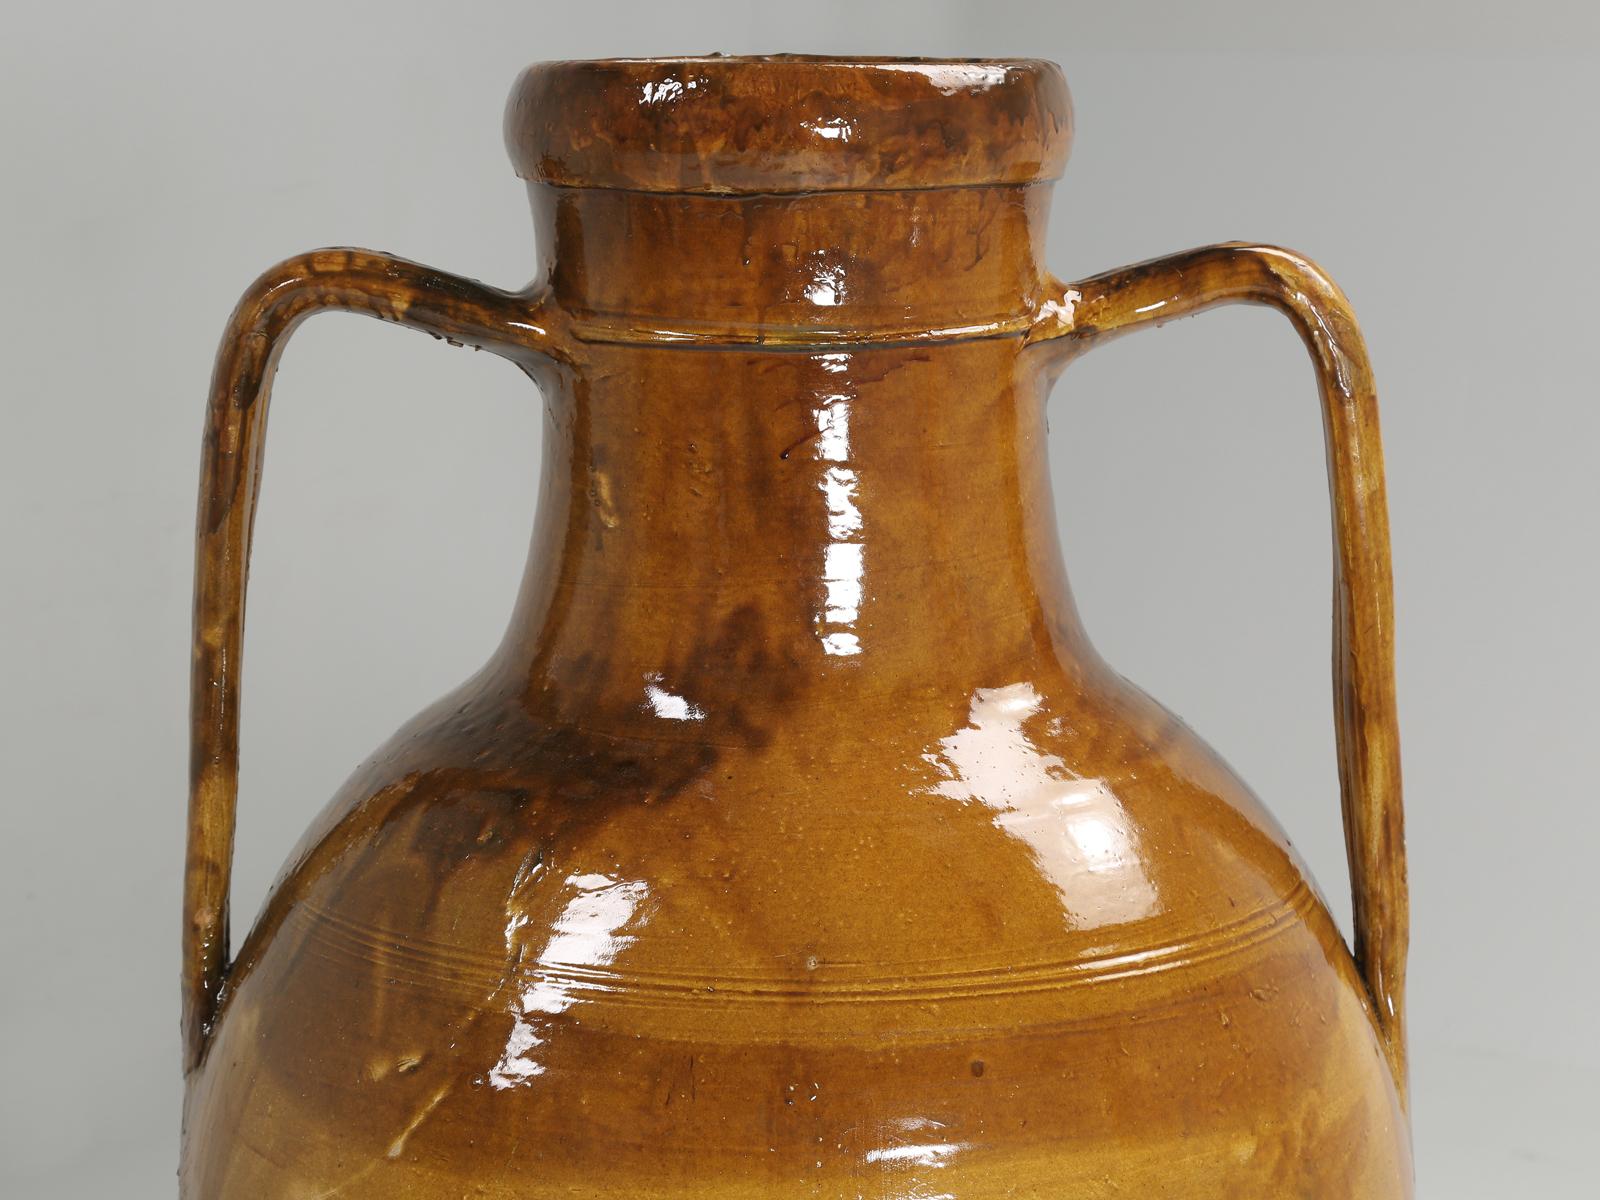 Glazed Italian Olive Oil Jar or Amphora Signed and Dated 1935 Imported from Italy